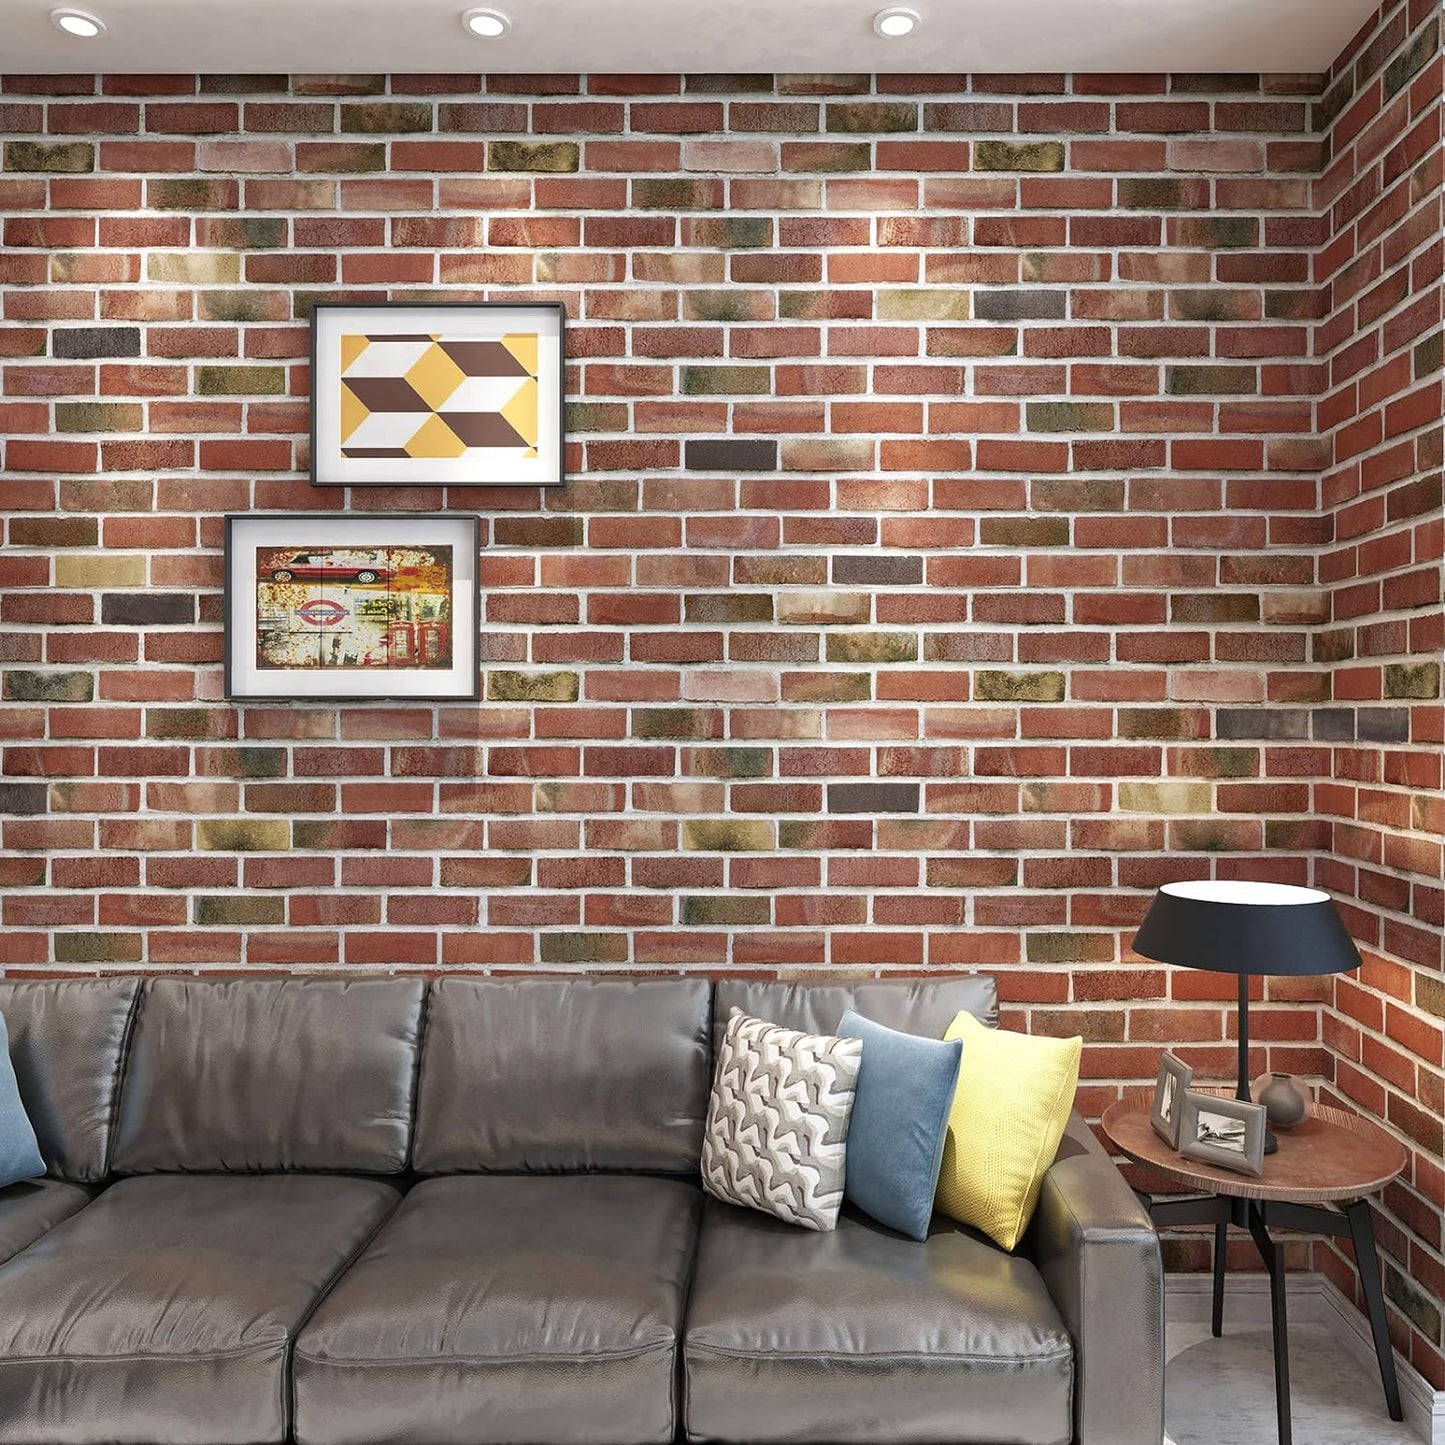 Art3d 20-Pack 105 Sq.Ft Faux Brick 3D Wall Panels Peel and Stick in Red Brown, Self Adhesive Waterproof Foam Wallpaper for Bedroom, Bathroom, Kitchen